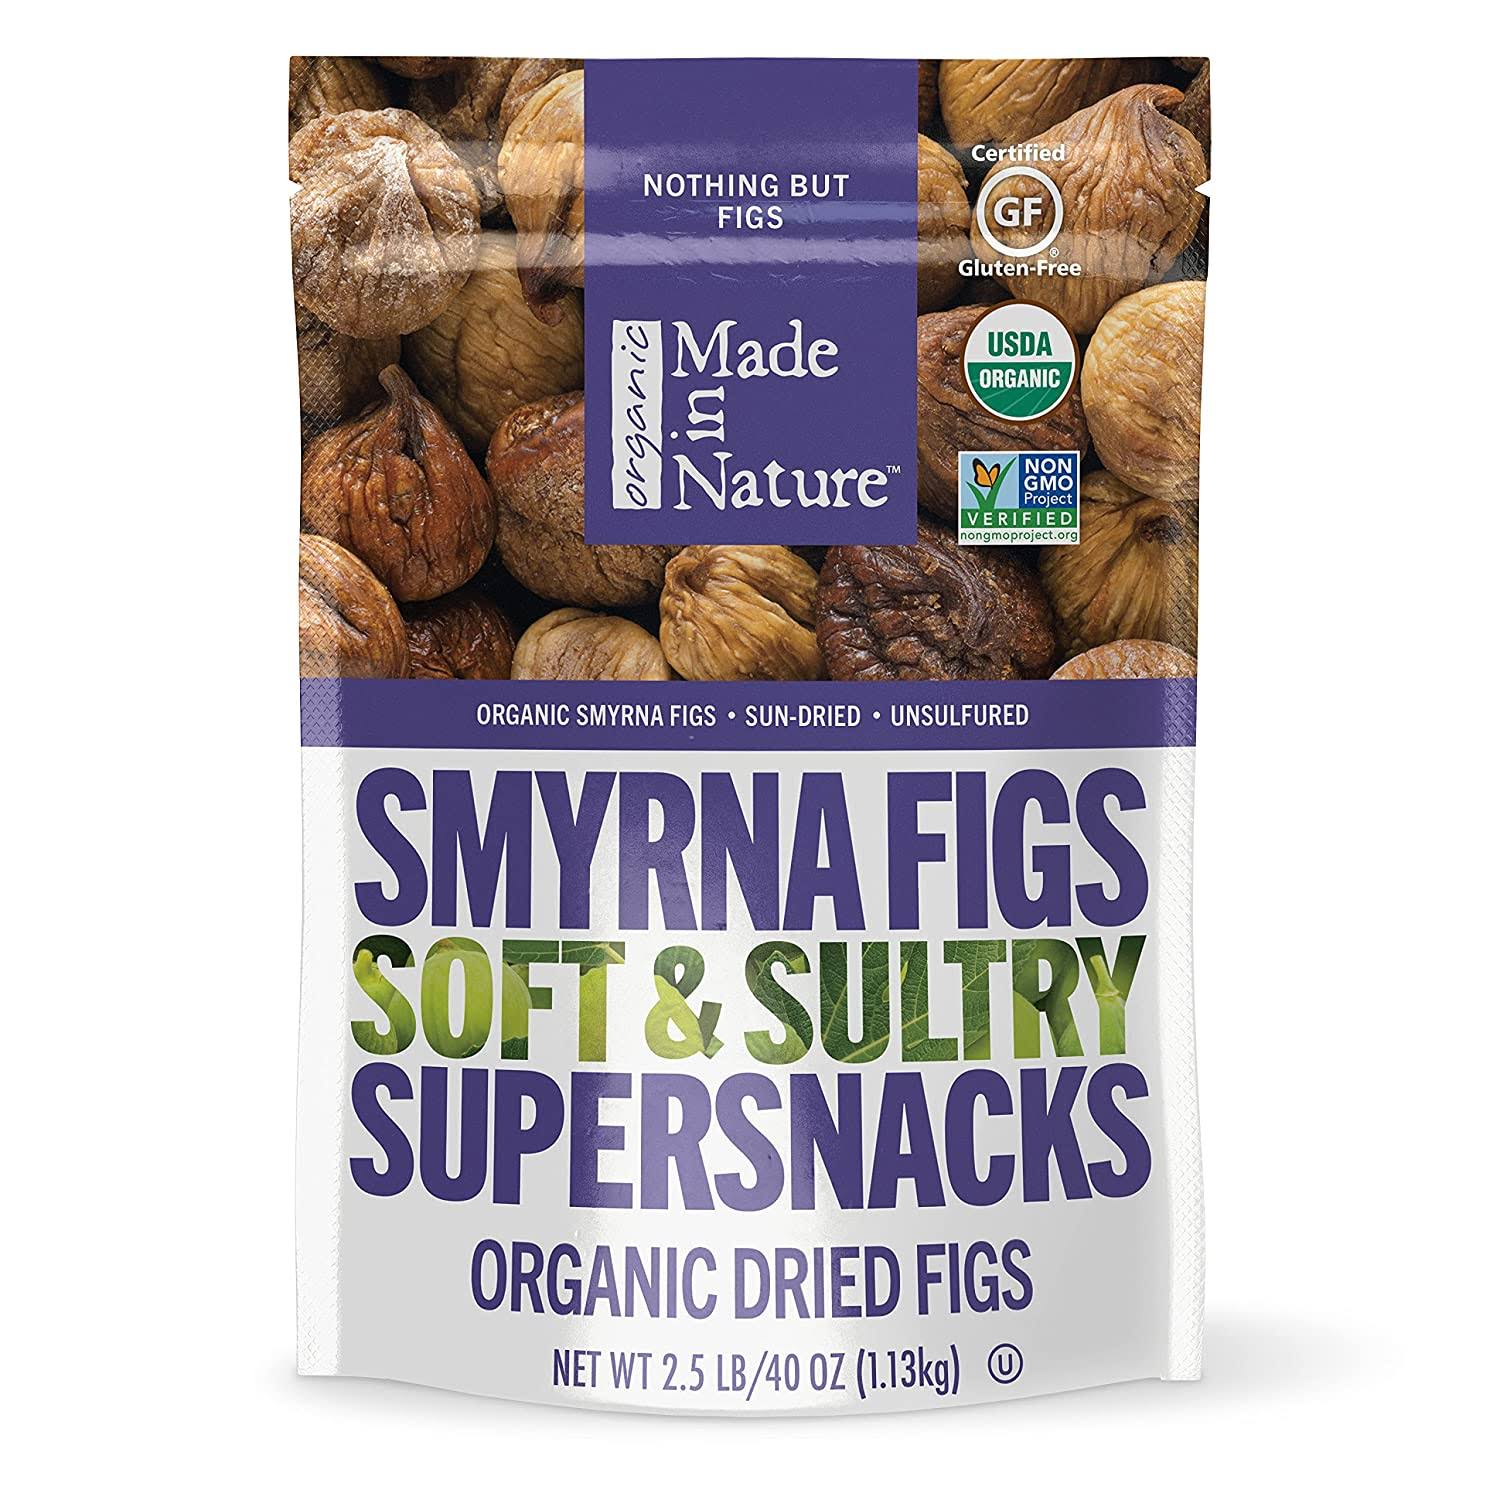 Made in Nature Organic Dried Fruit, Turkish Smyrna Figs, 40oz Bag Non